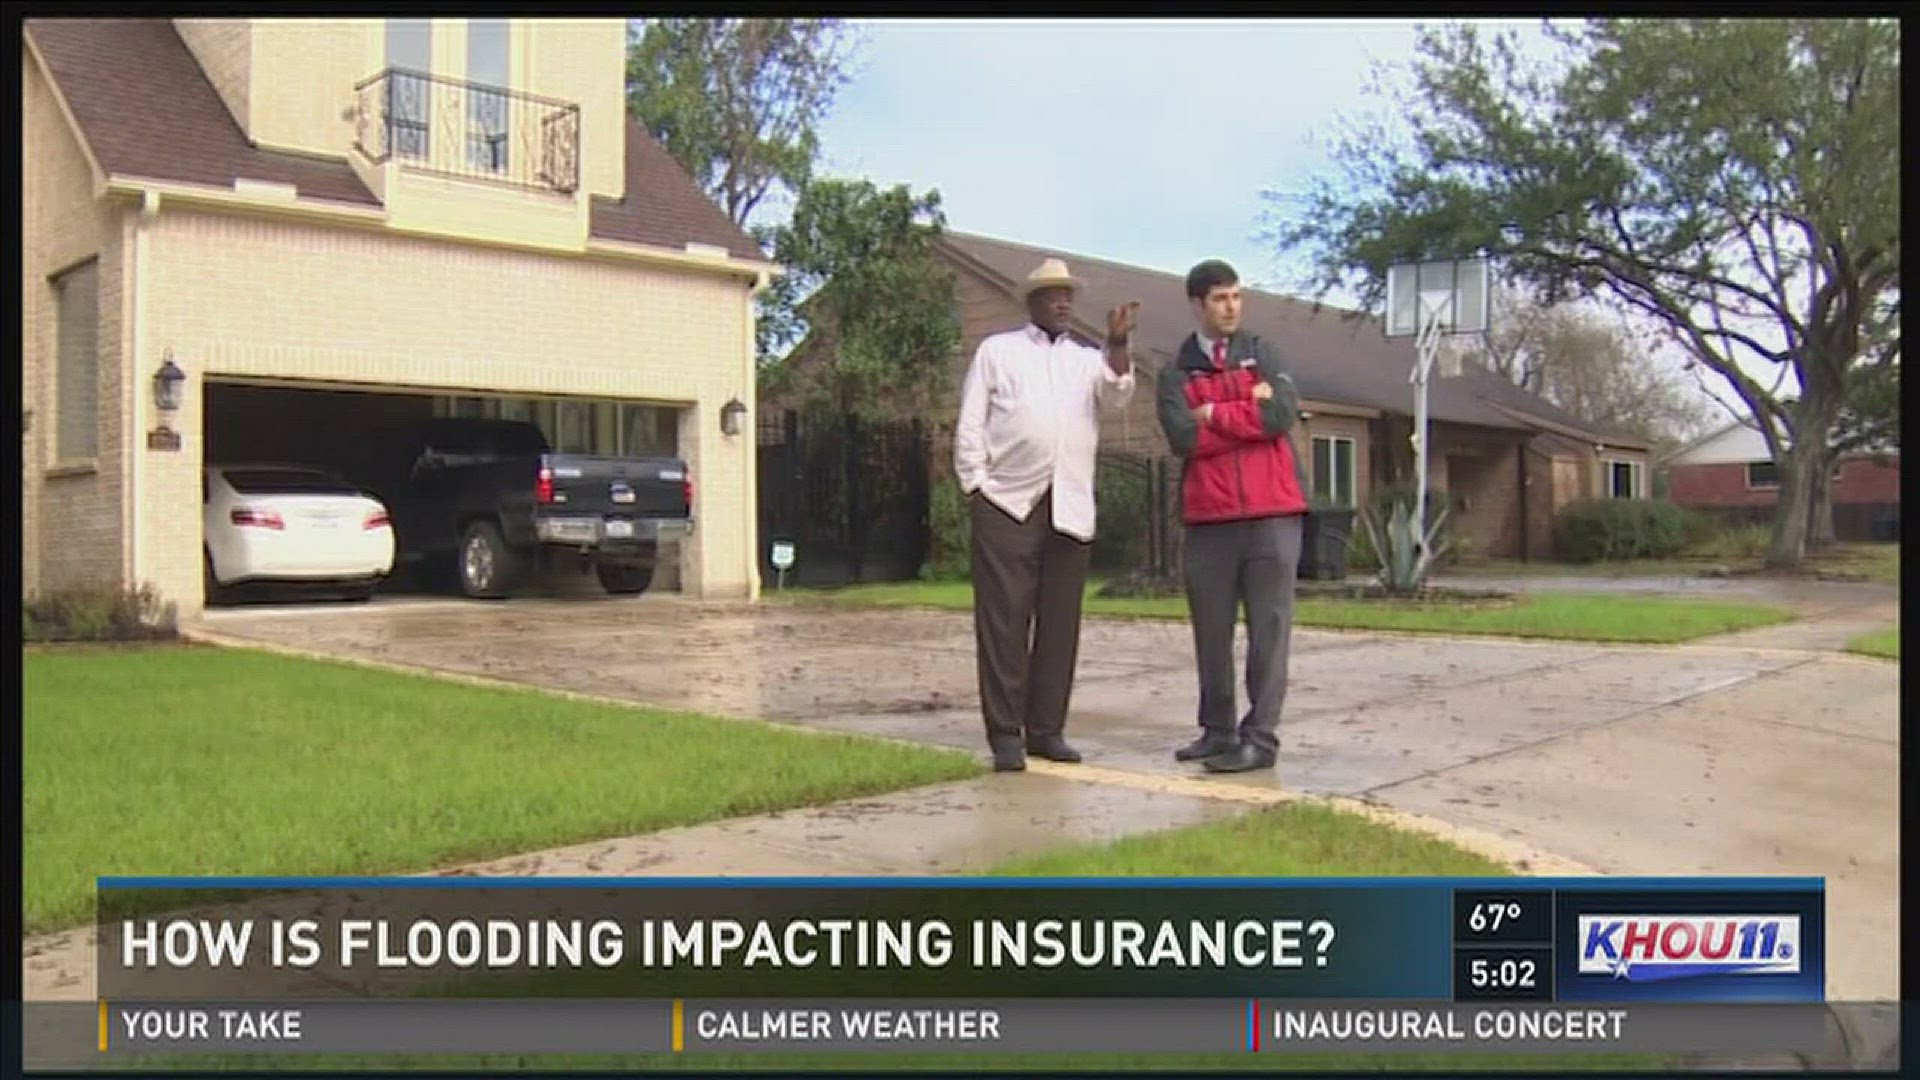 KHOU's Adam Bennett looks at how insurance premiums are impacting Houston homeowners dealing with flooding yet again.